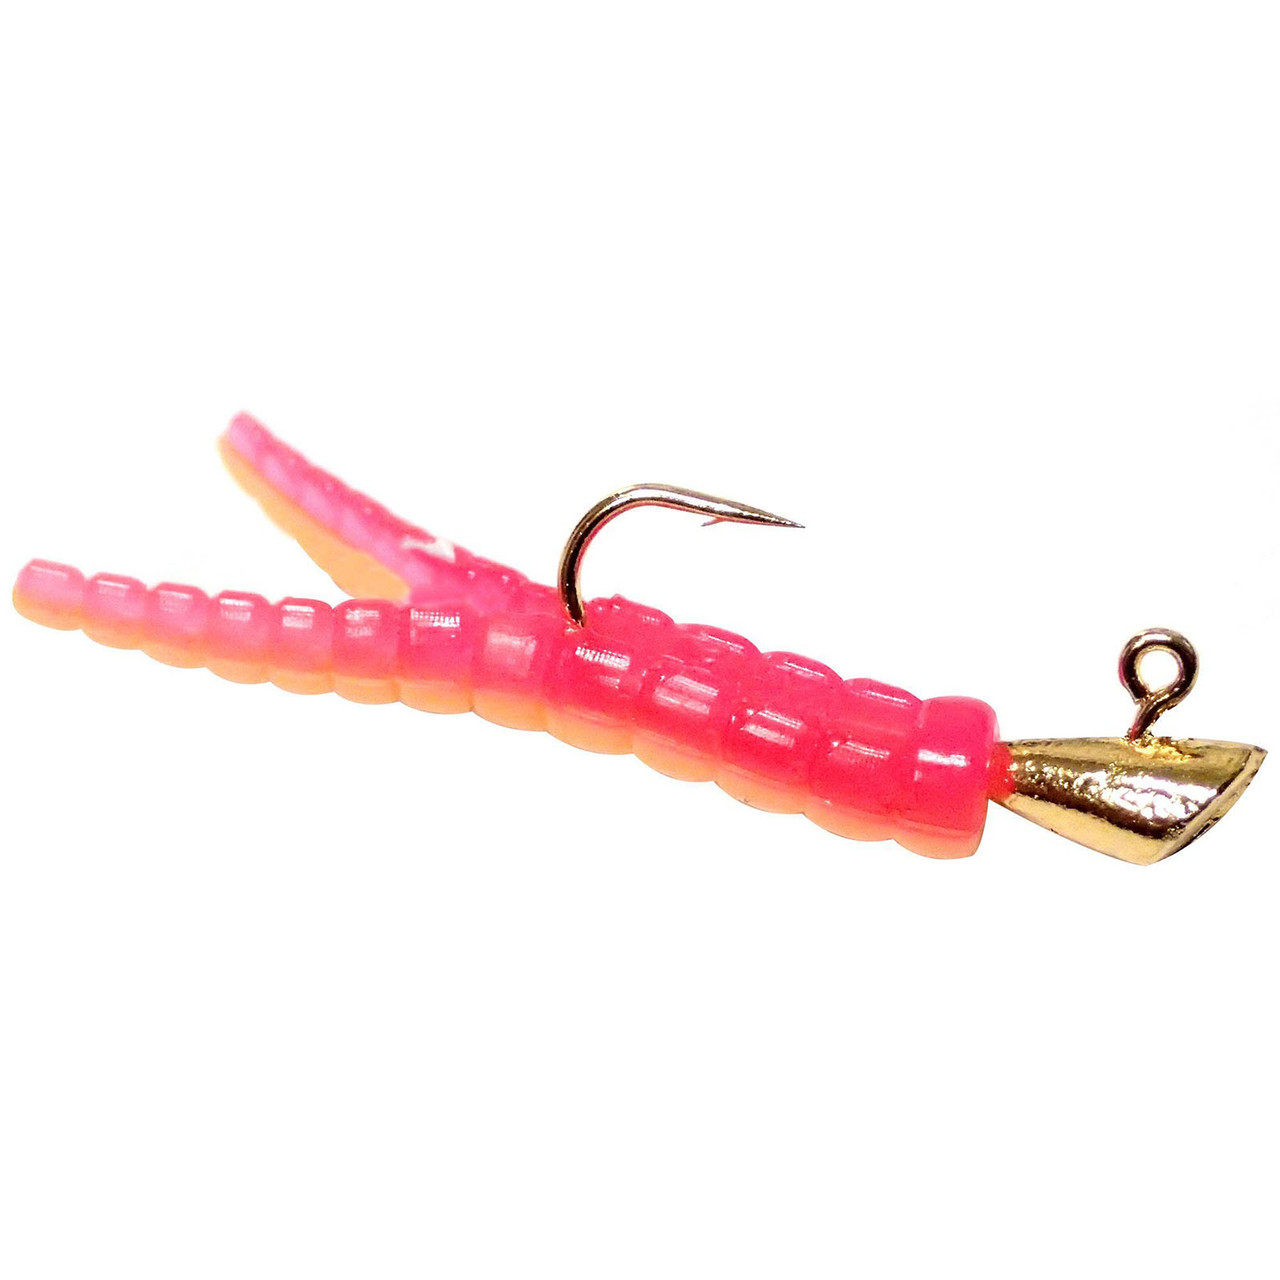 Leland's Lures Trout Magnets - FishUSA